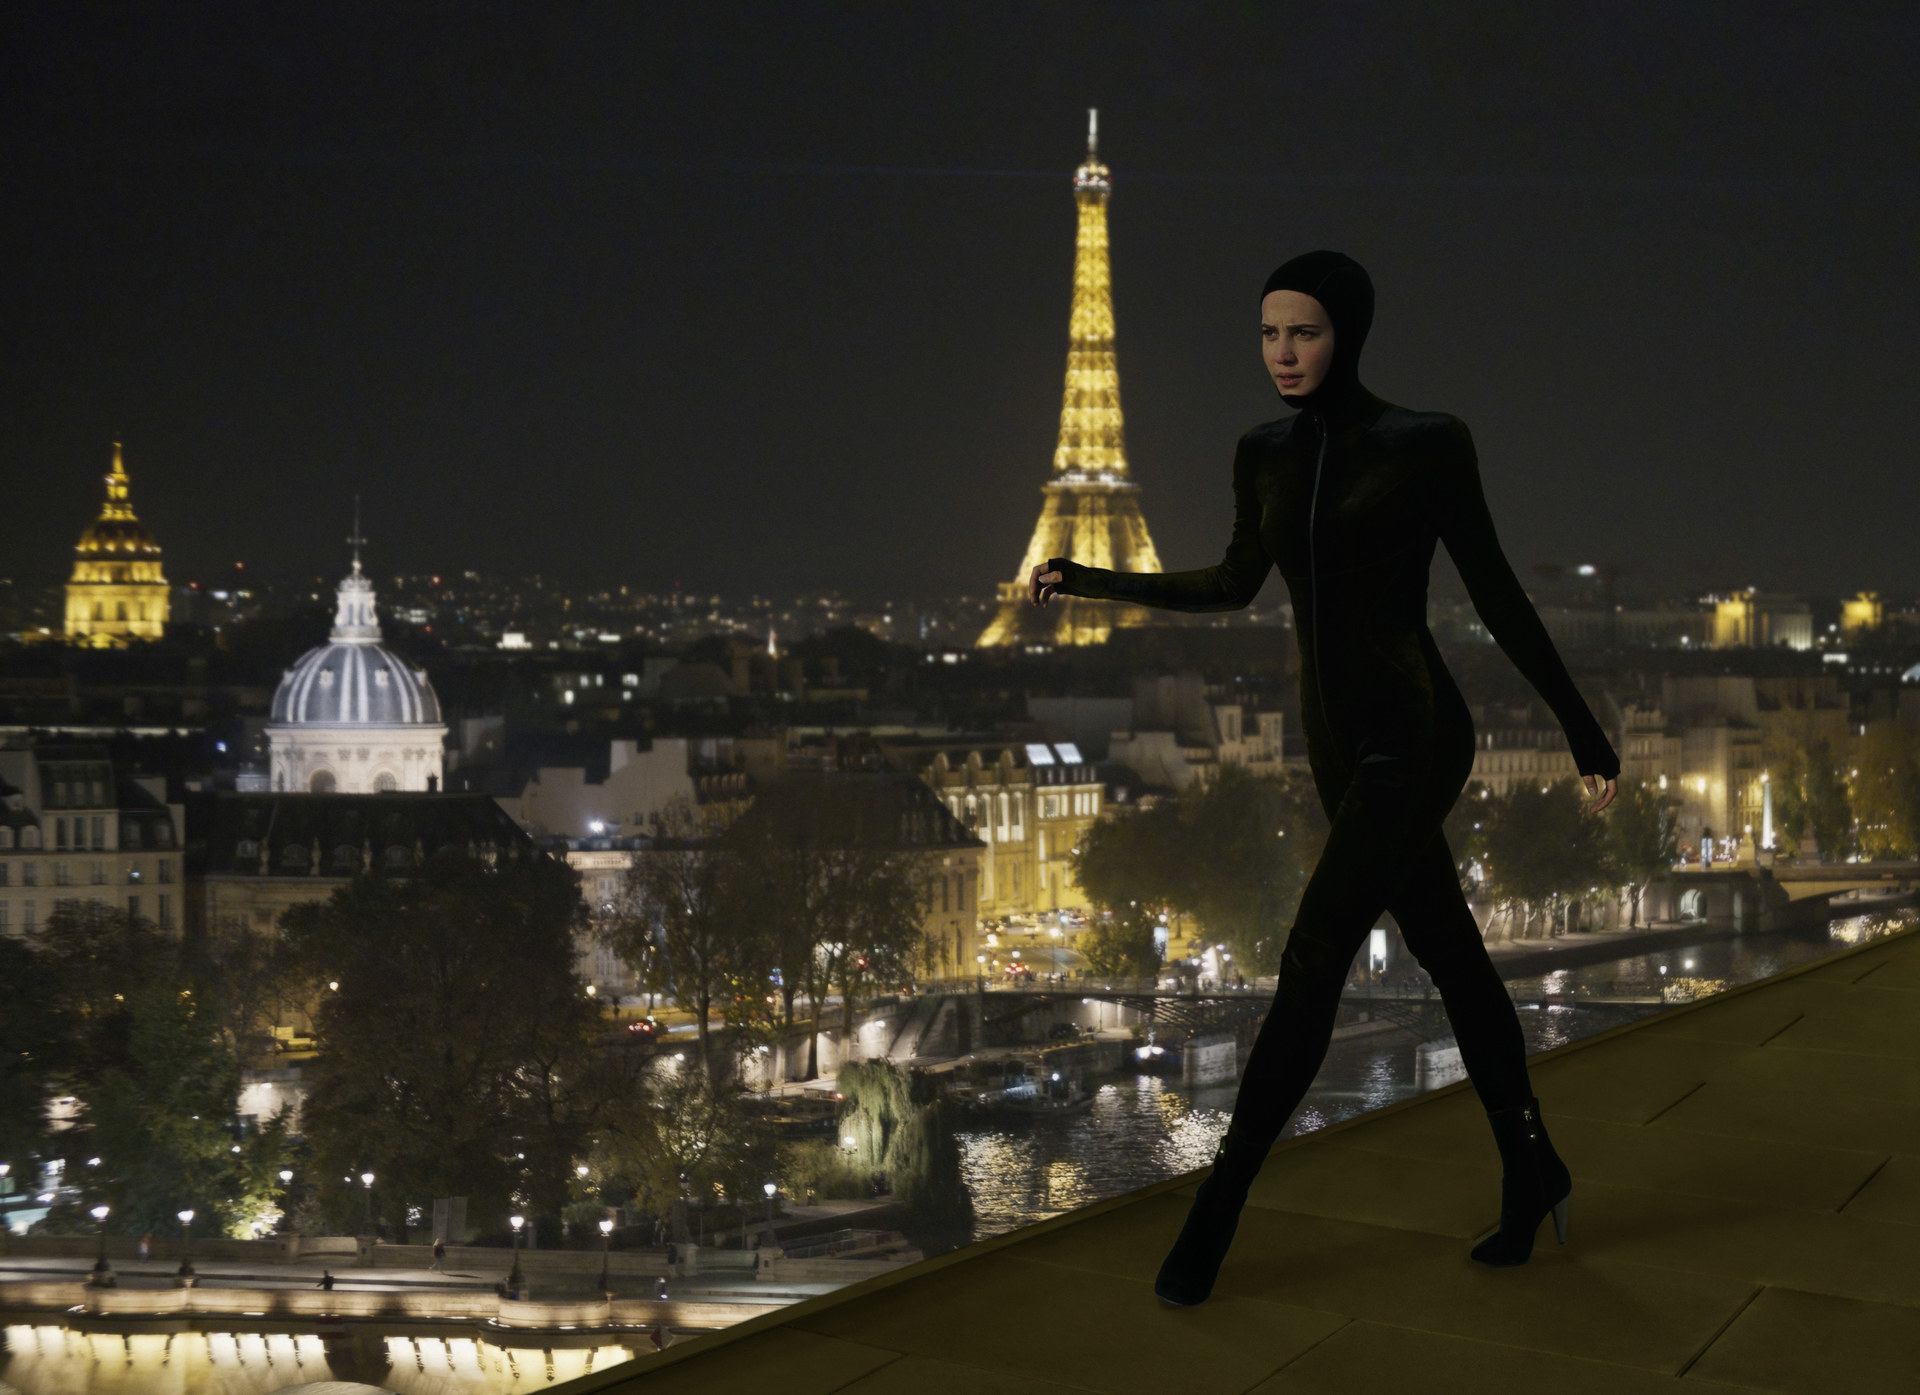 Mira wearing her catsuit costume against the Paris skyline in Irma Vep